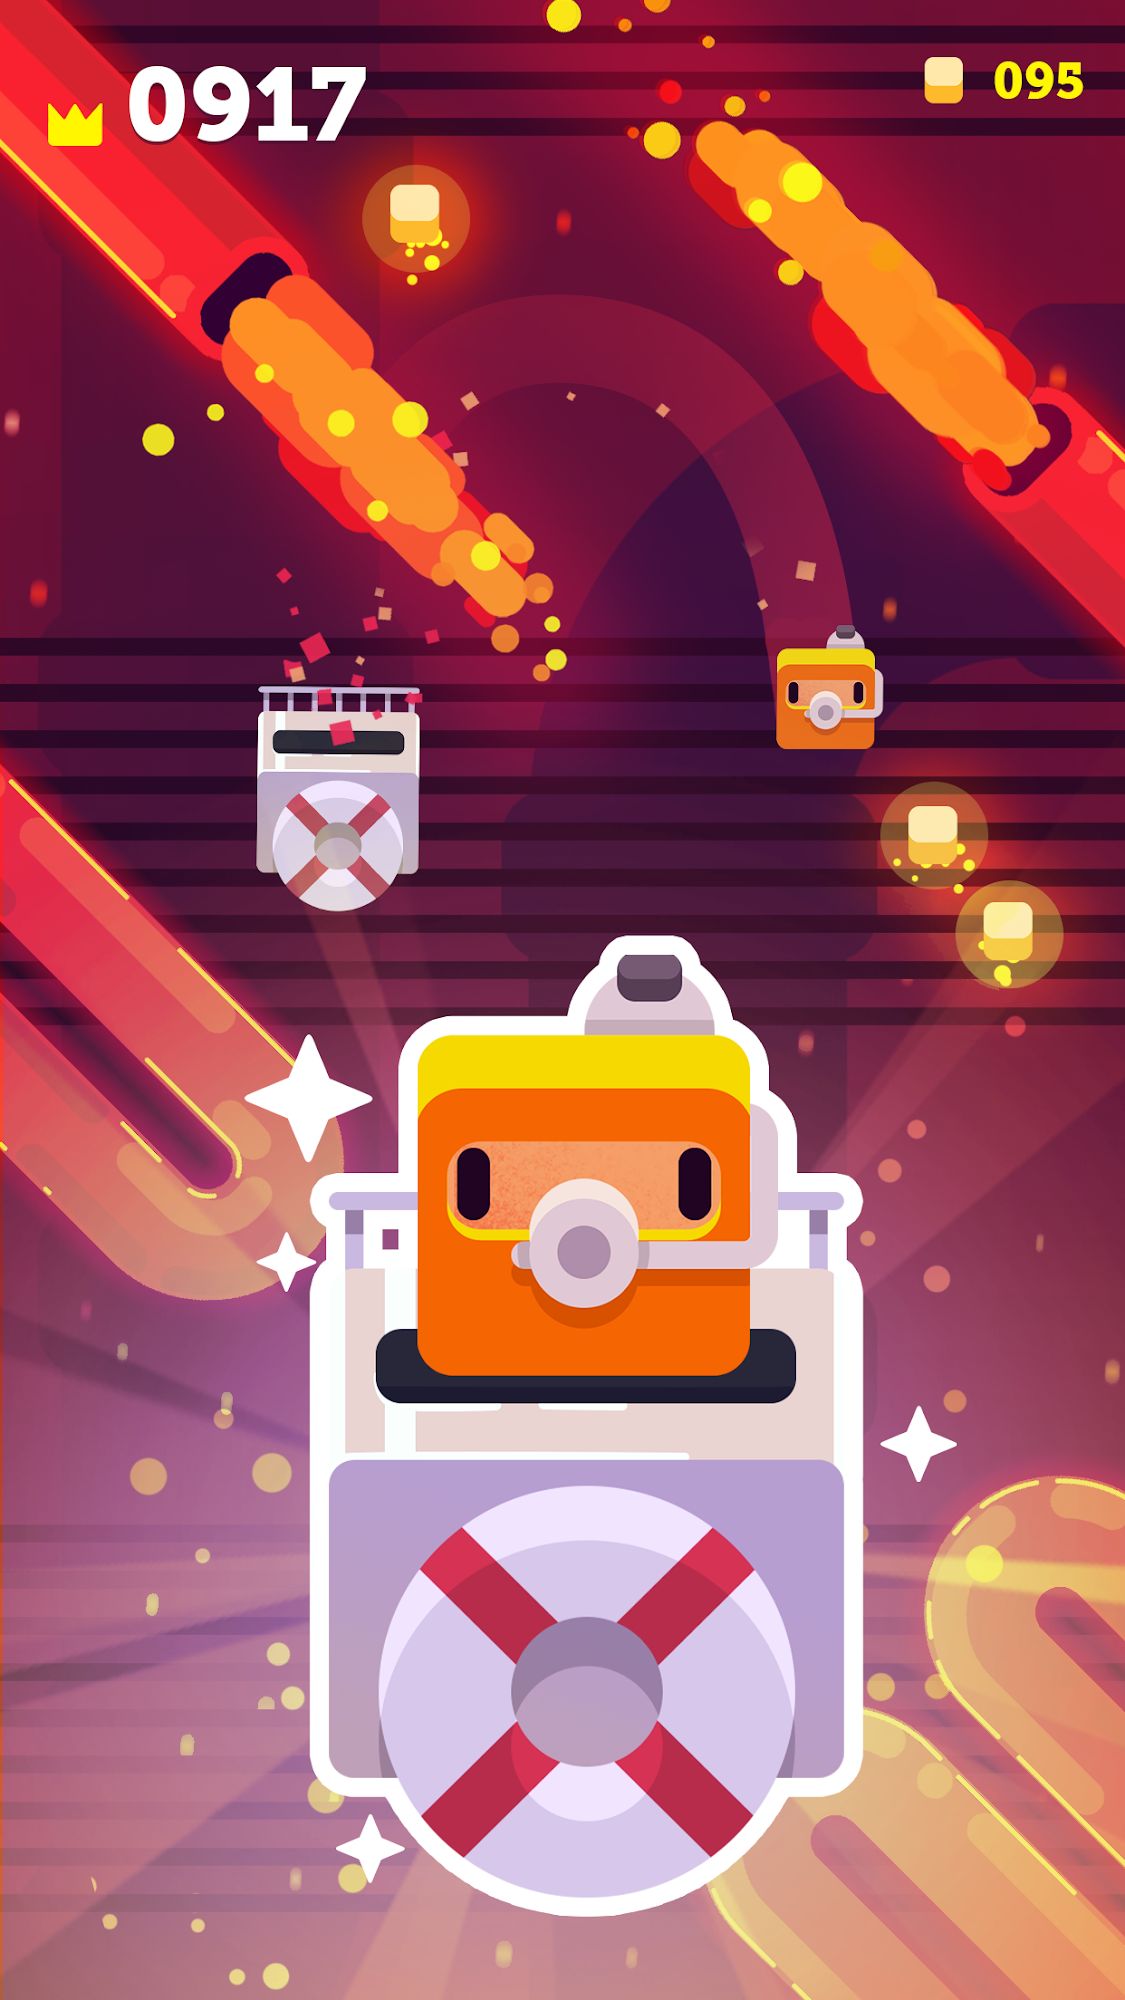 Toast it Up - Android game screenshots.